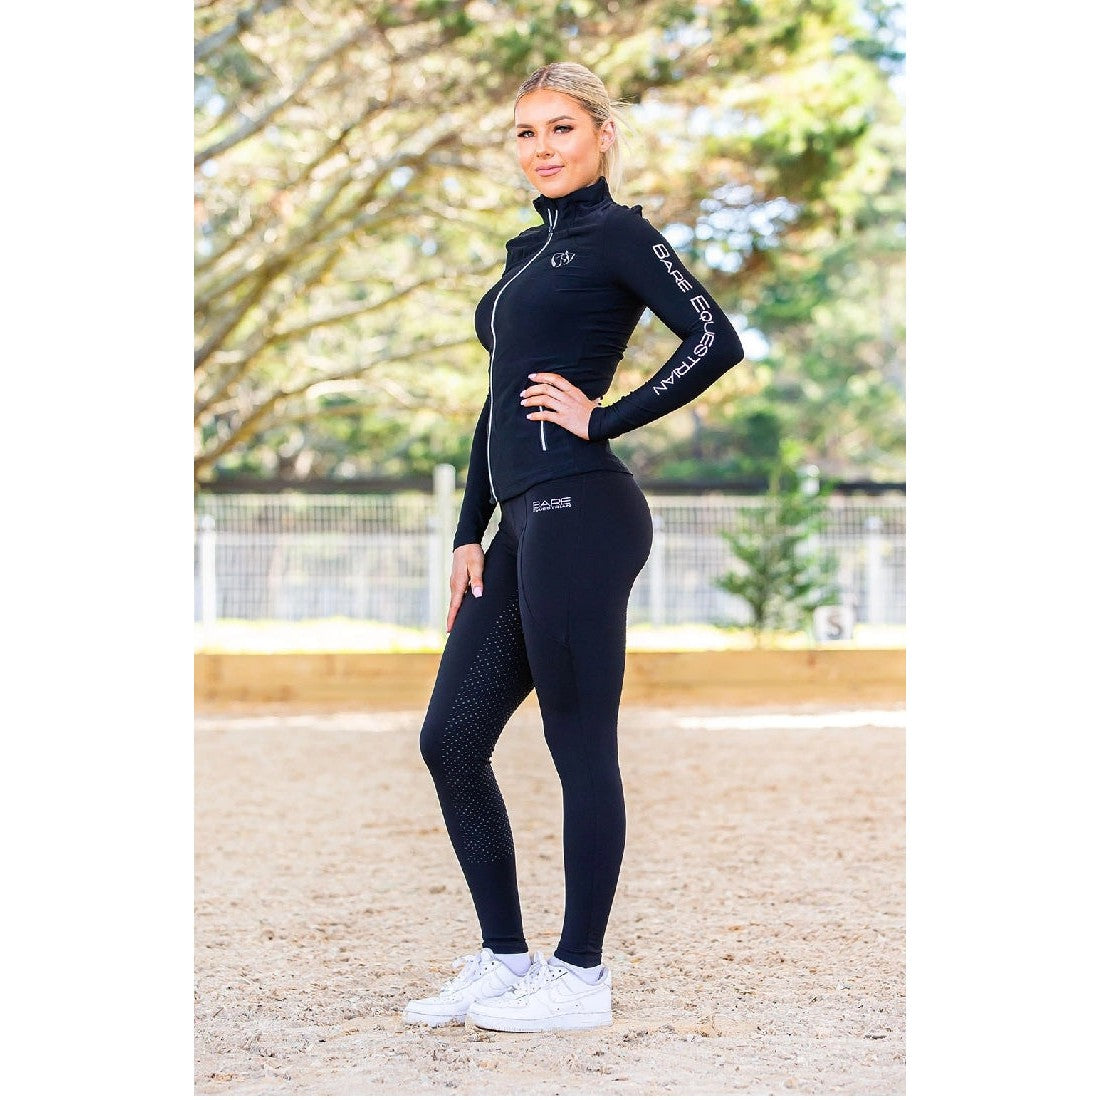 Woman posing in black horse riding tights and matching long-sleeve top.